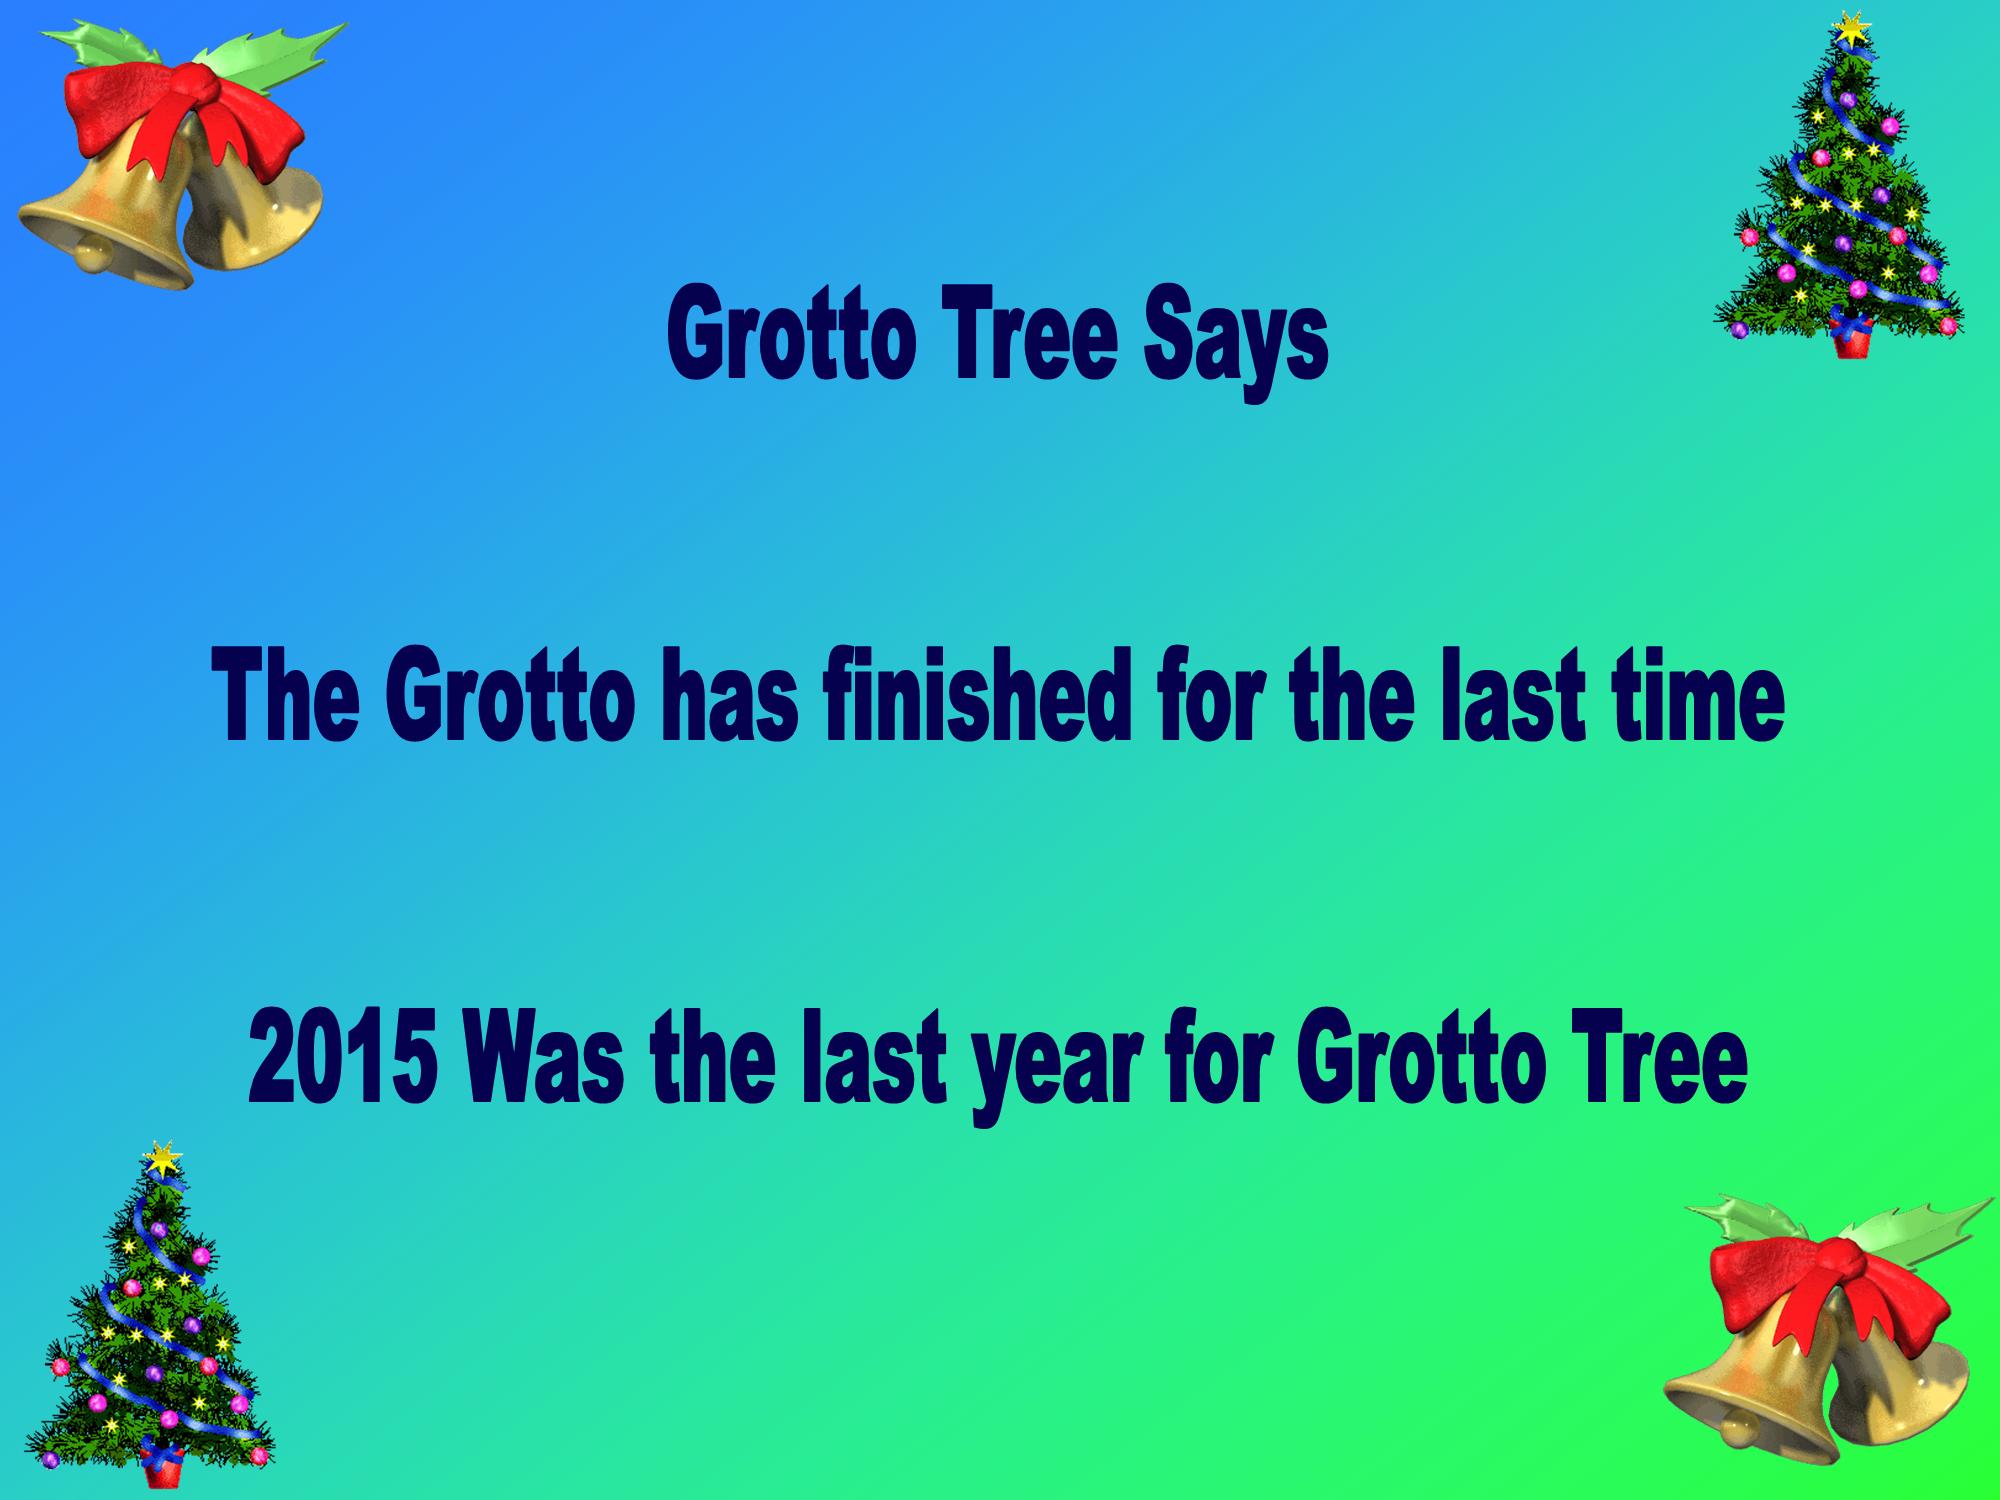 Grotto Tree is over since 2015.